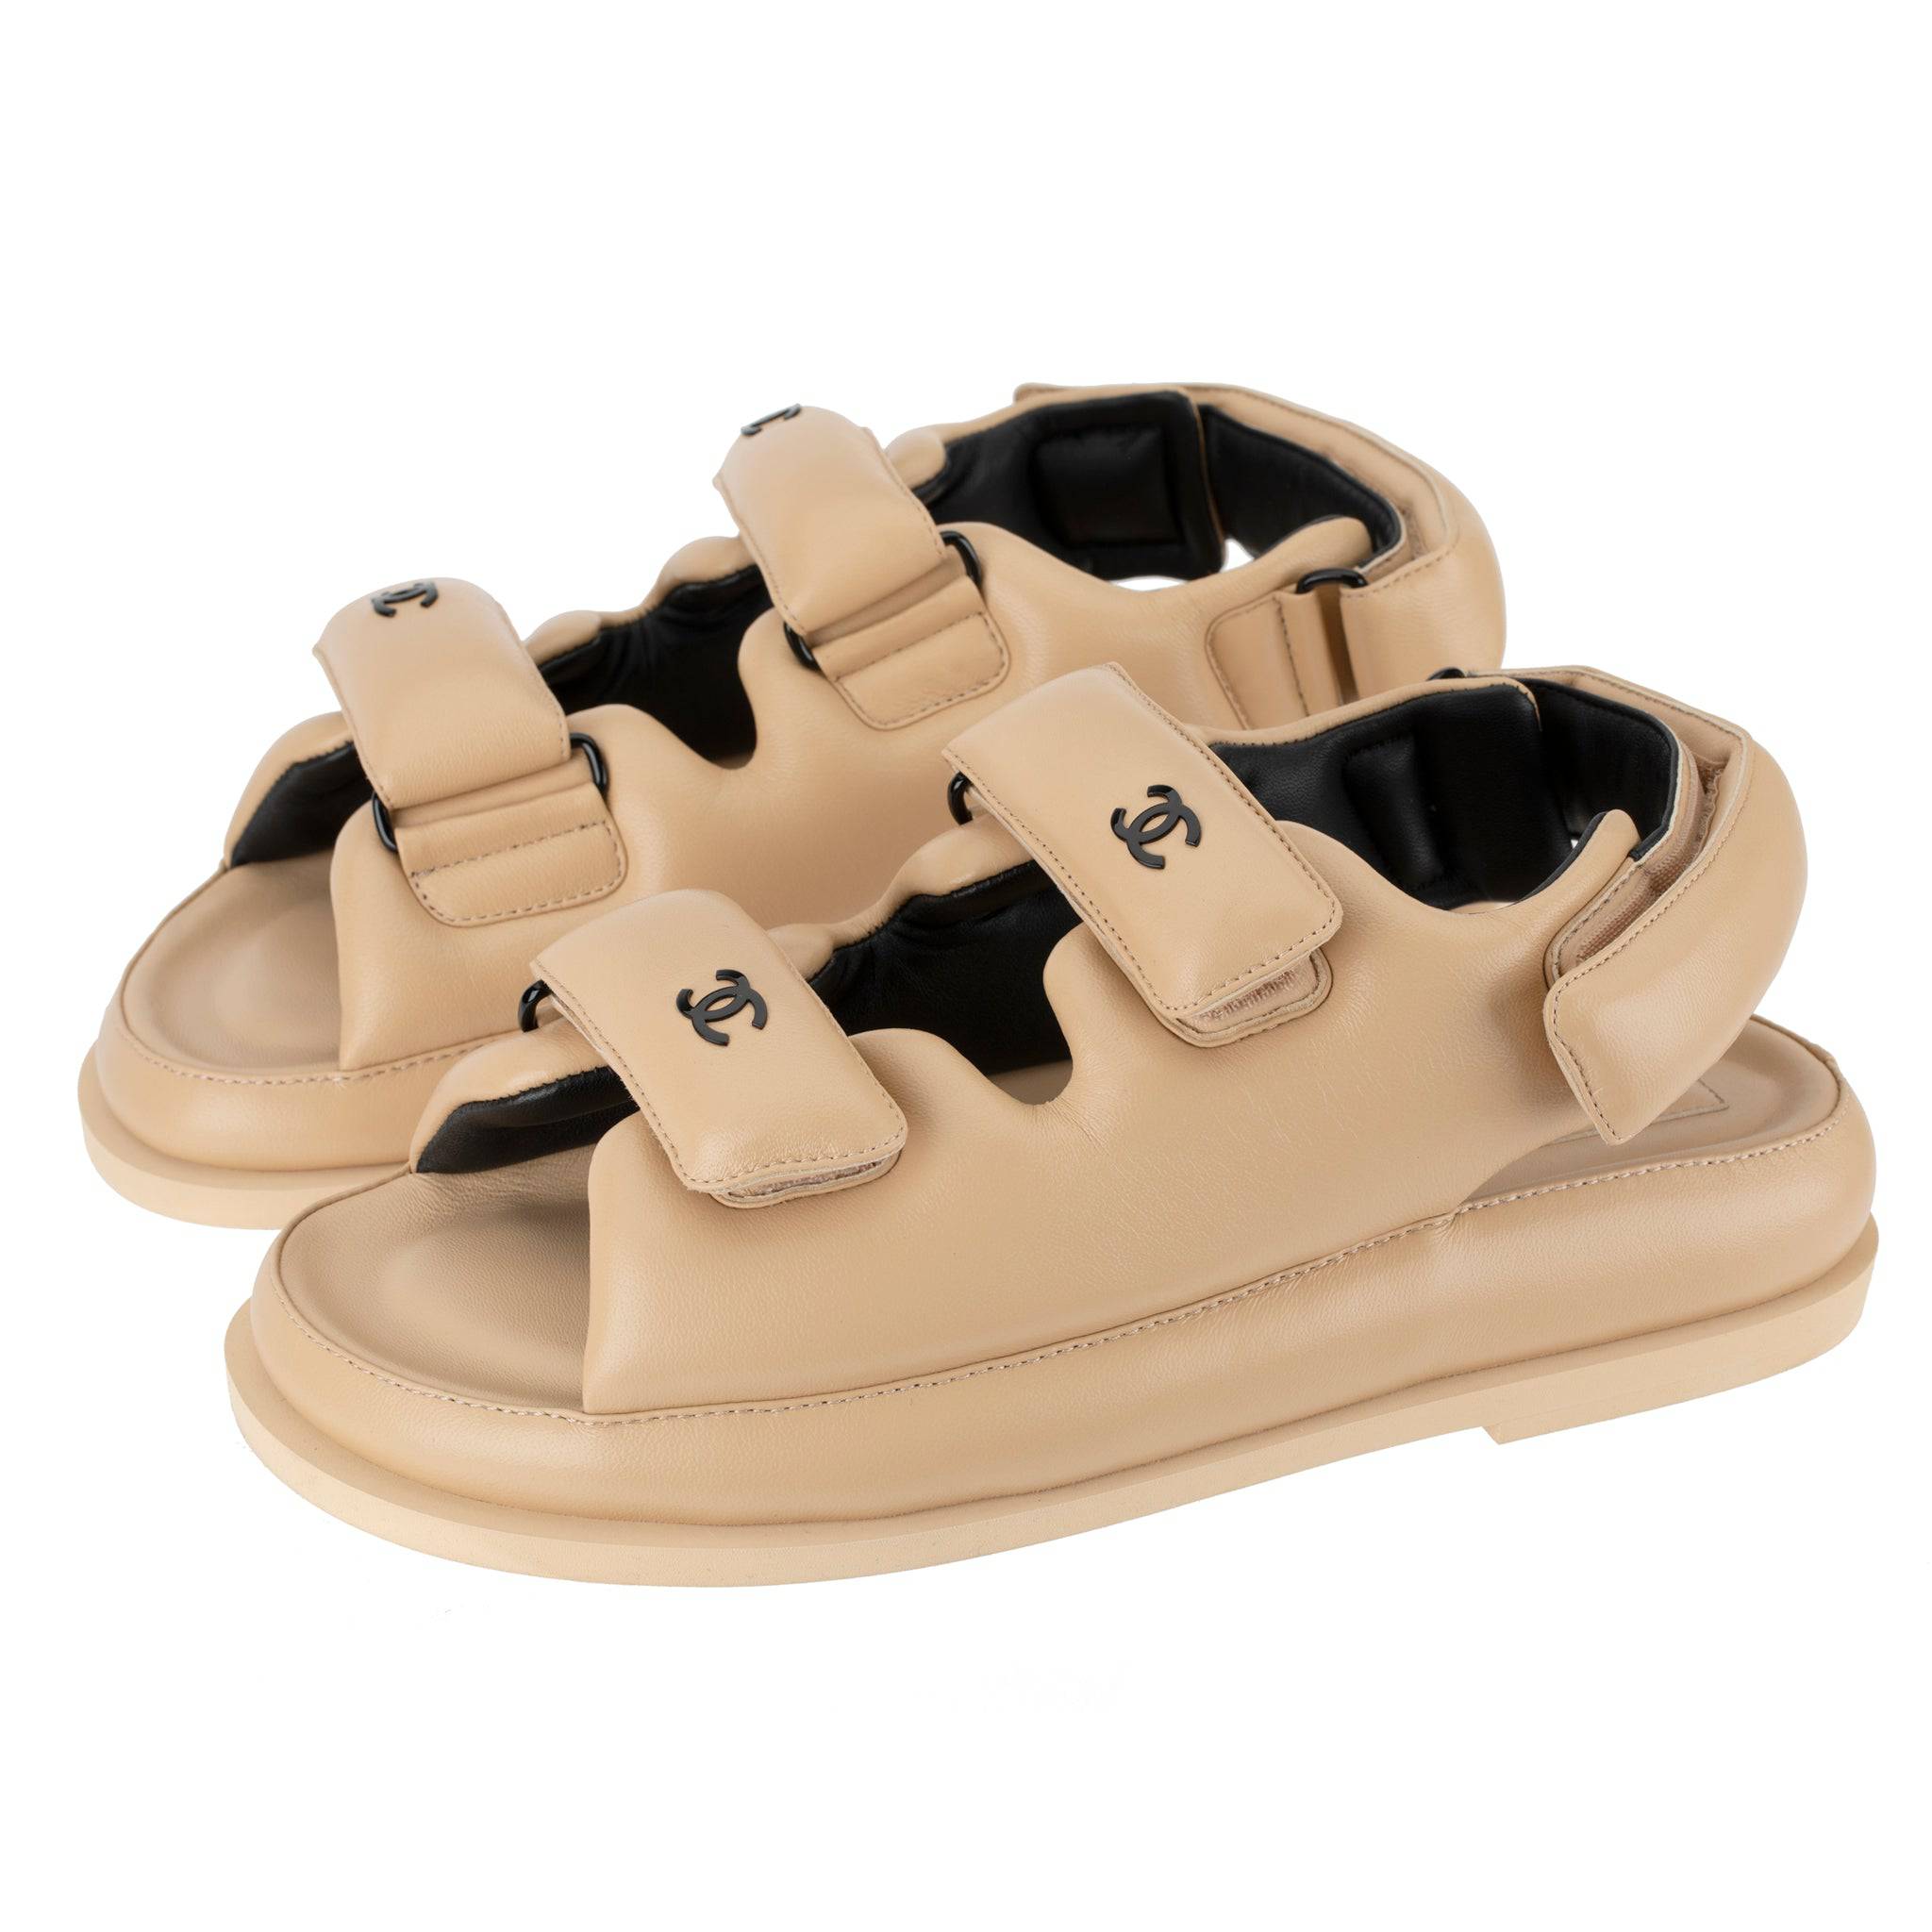 CHANEL DAD SANDALS PADDED LAMBSKIN BEIGE 39 FR - On Repeat